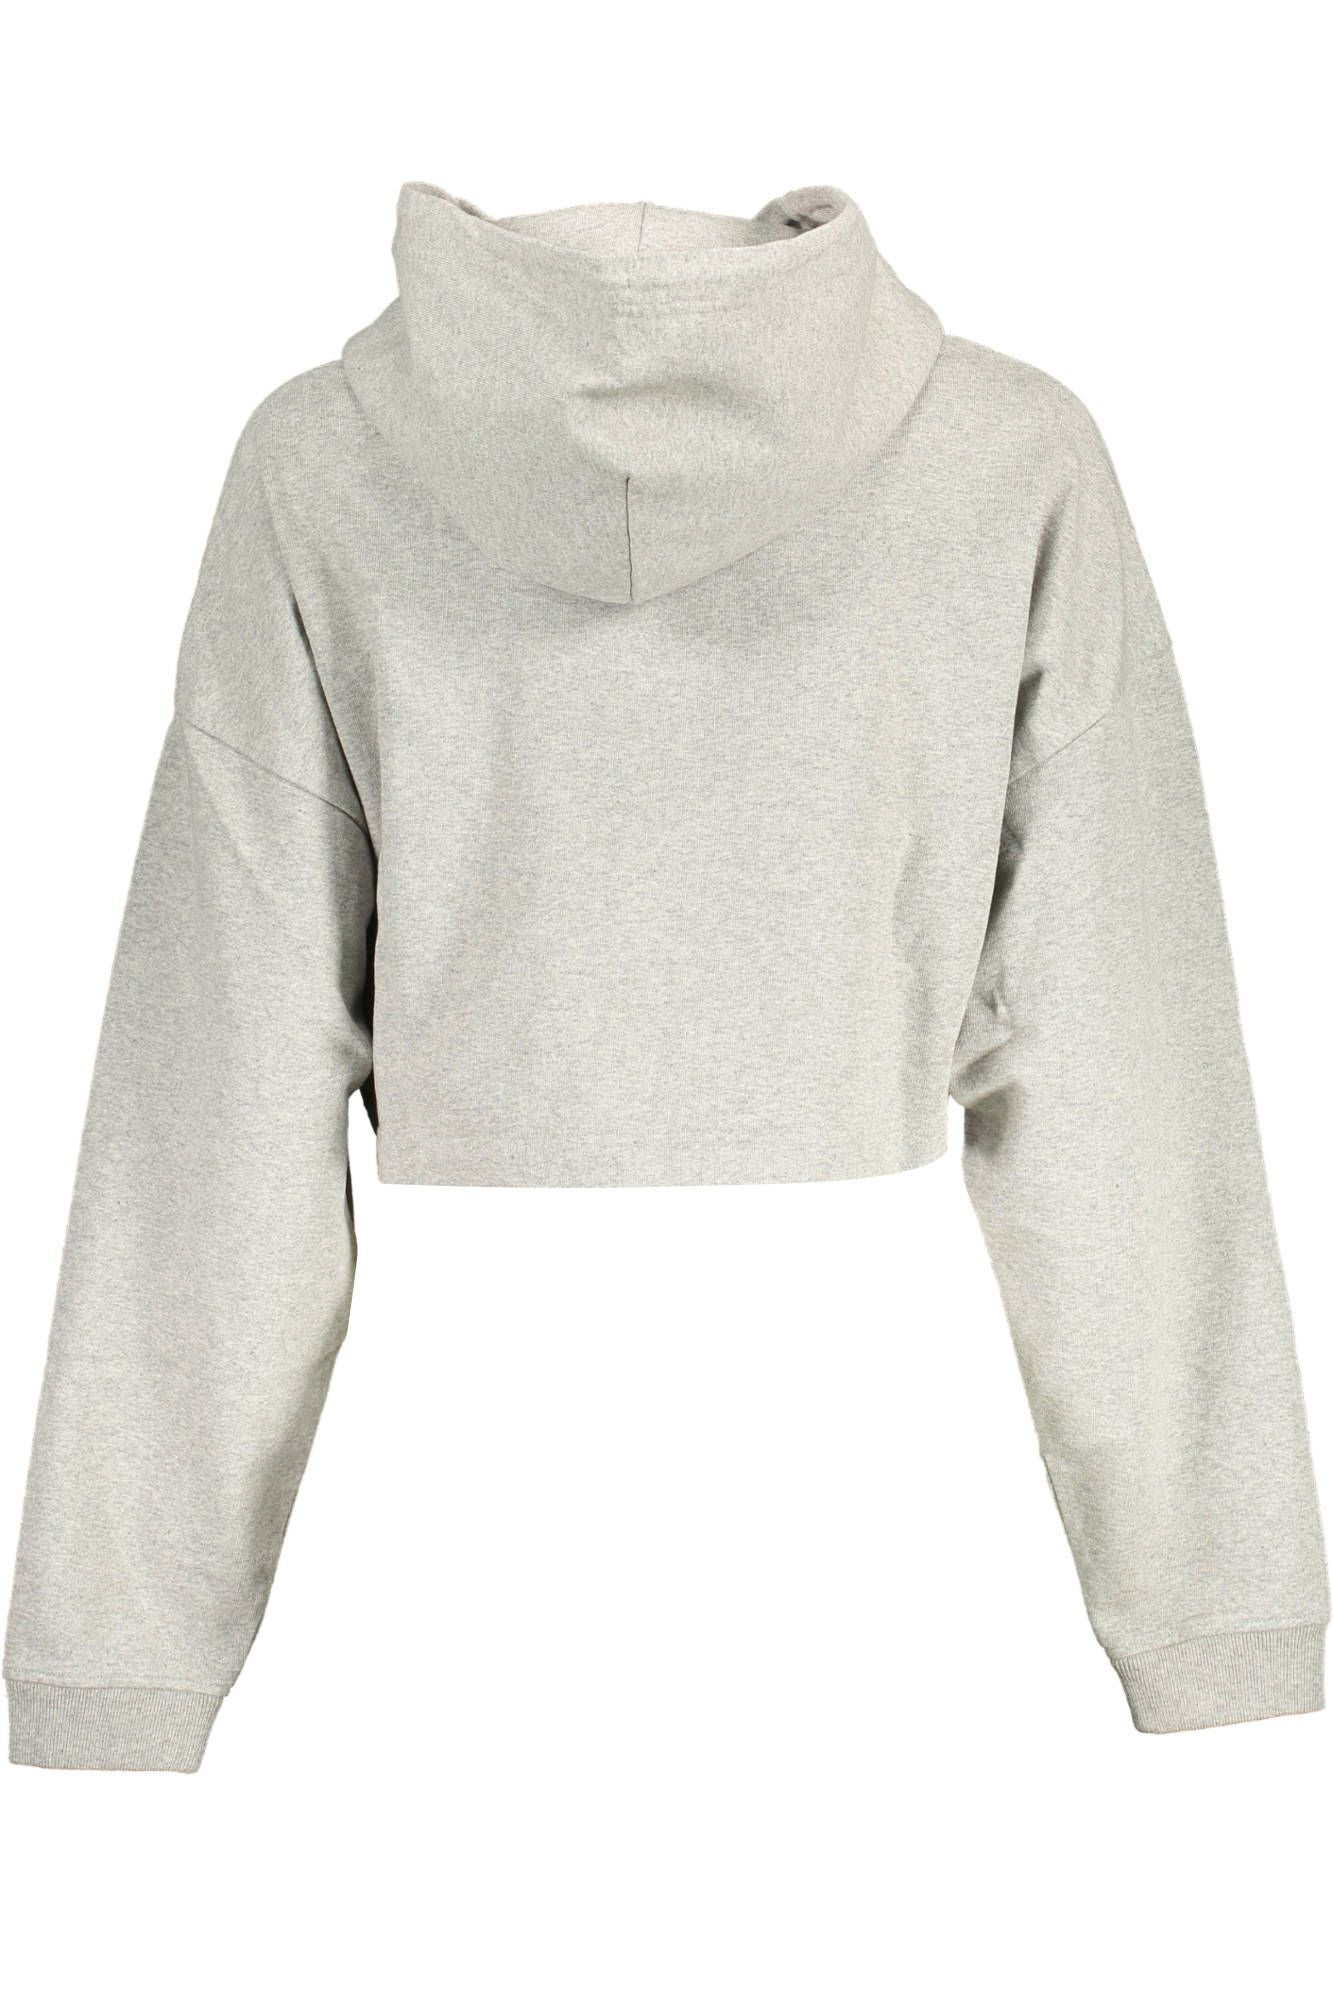 Chic Gray Embroidered Hoodie With Sleek Logo